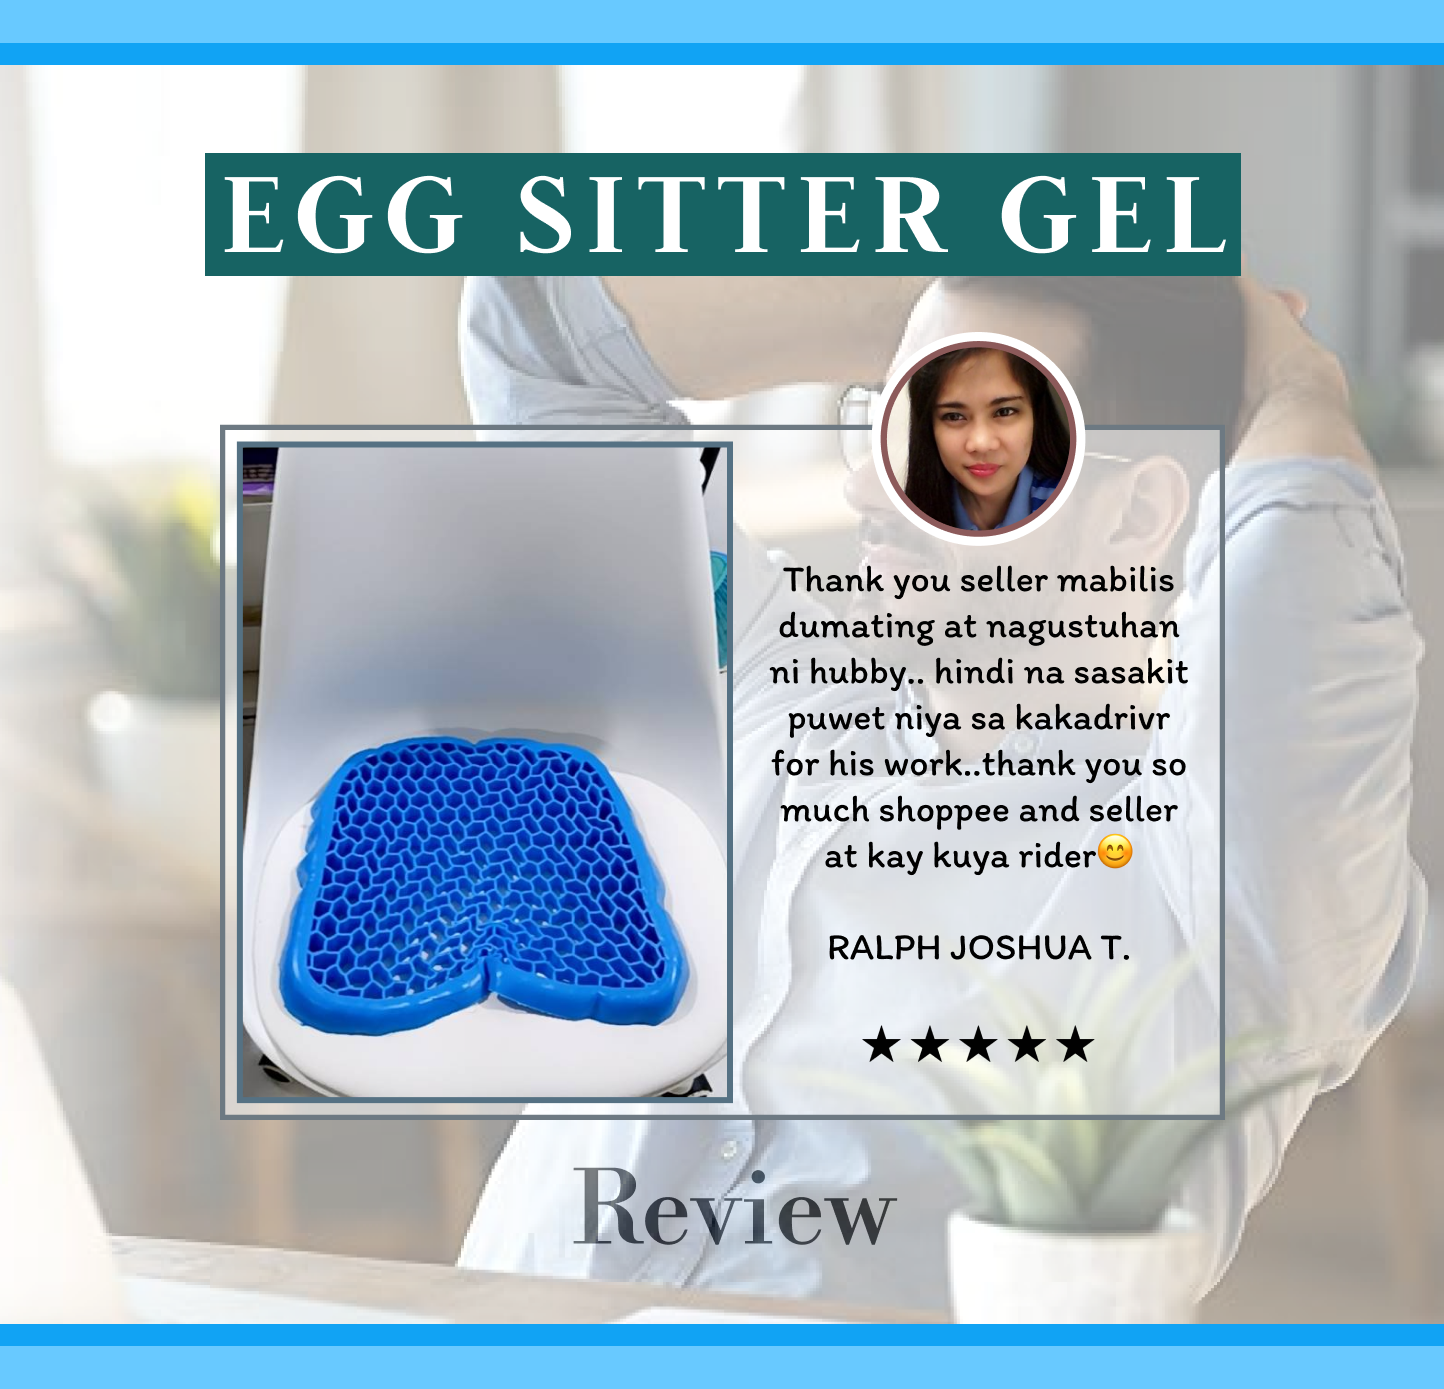 Does It Really Work: Egg Sitter